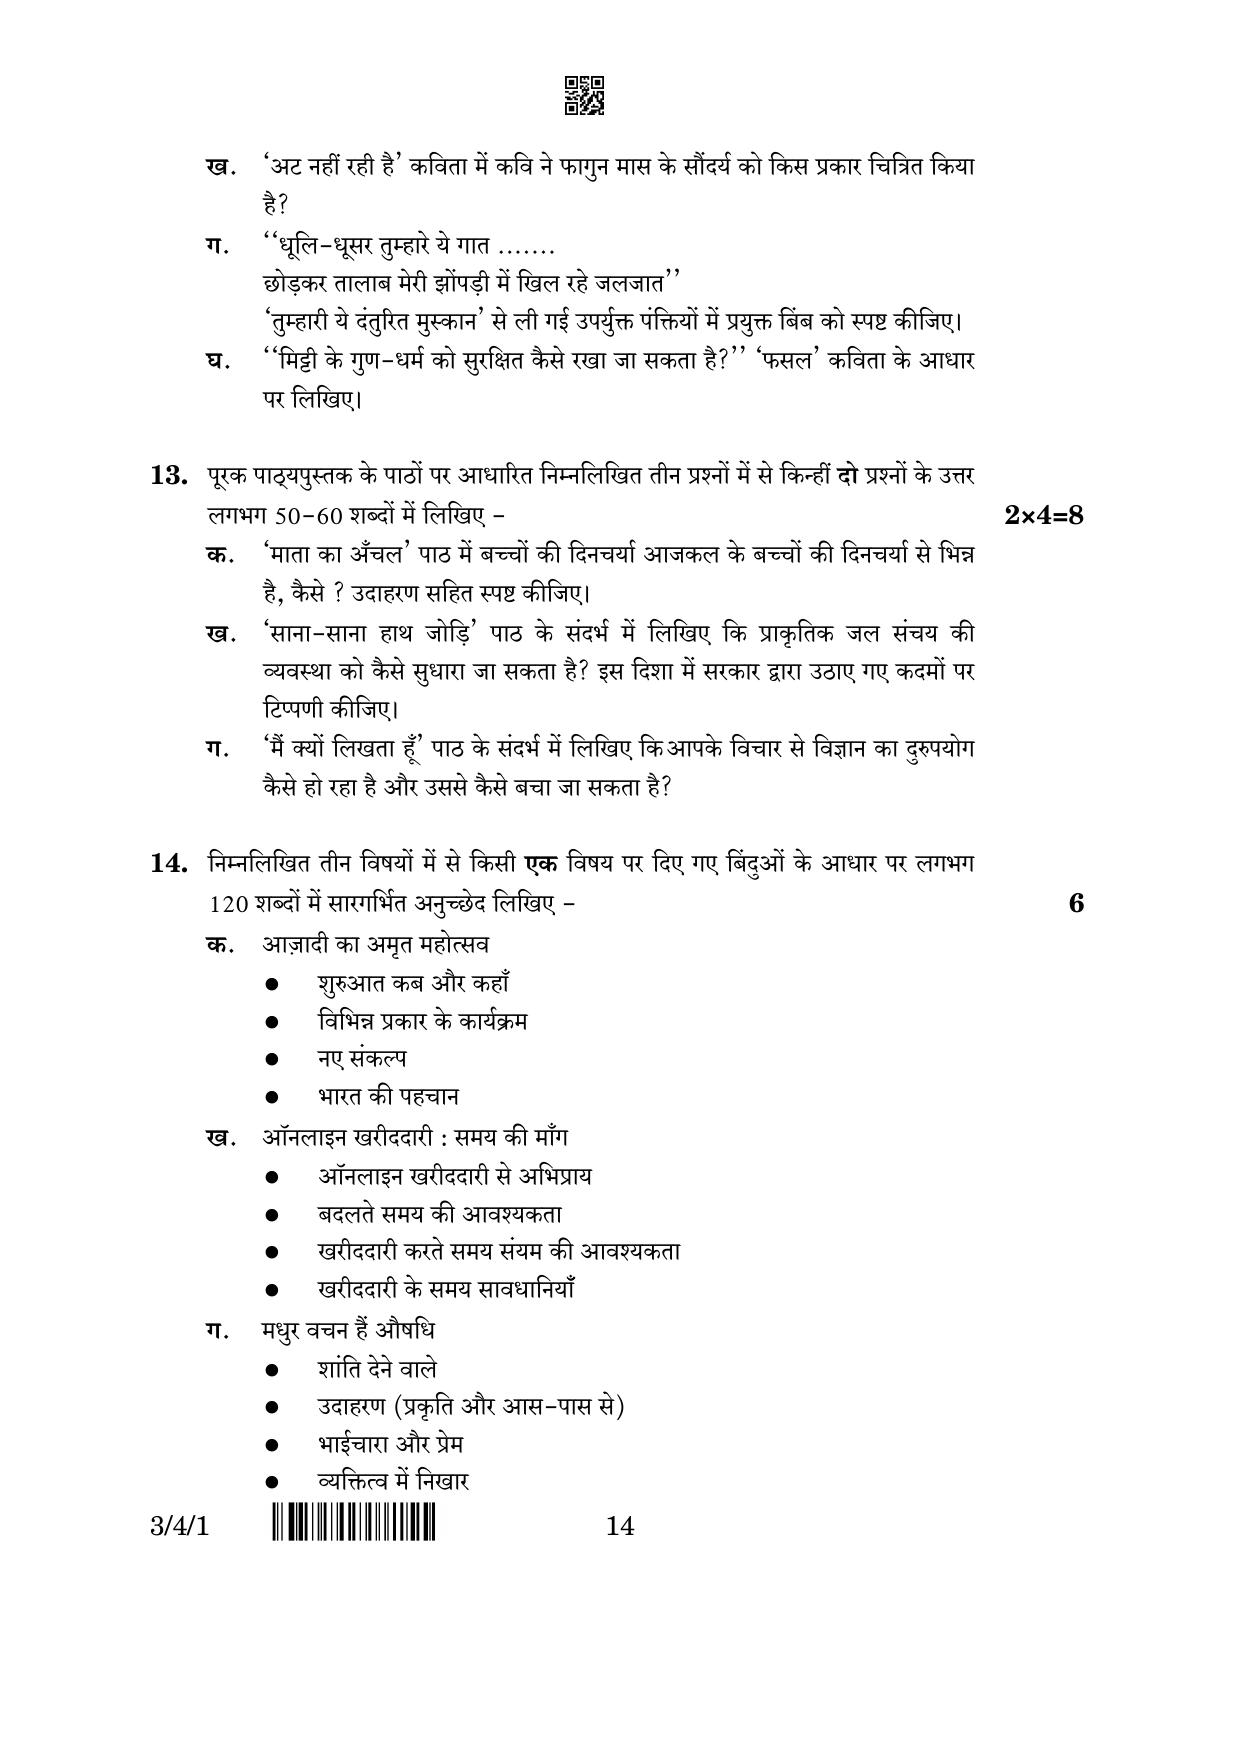 CBSE Class 10 3-4-1 Hindi A 2023 Question Paper - Page 14